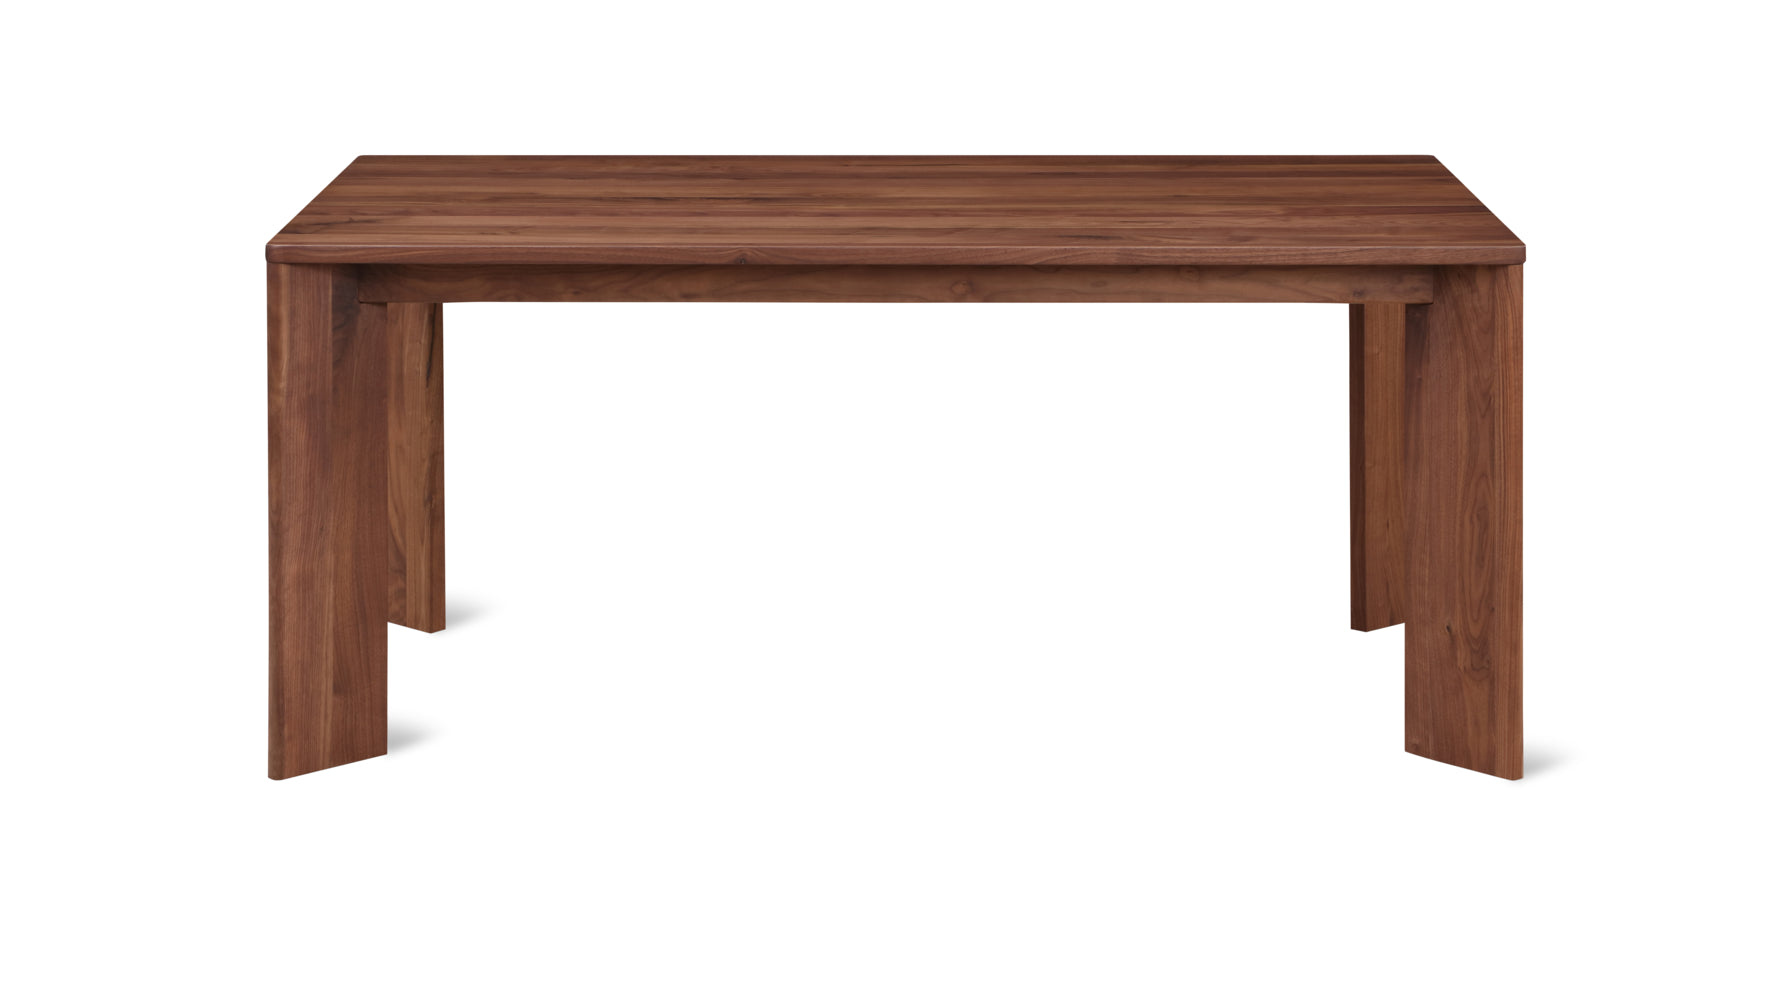 Frame Dining Table, Seats 4-6 People, Walnut - Image 2